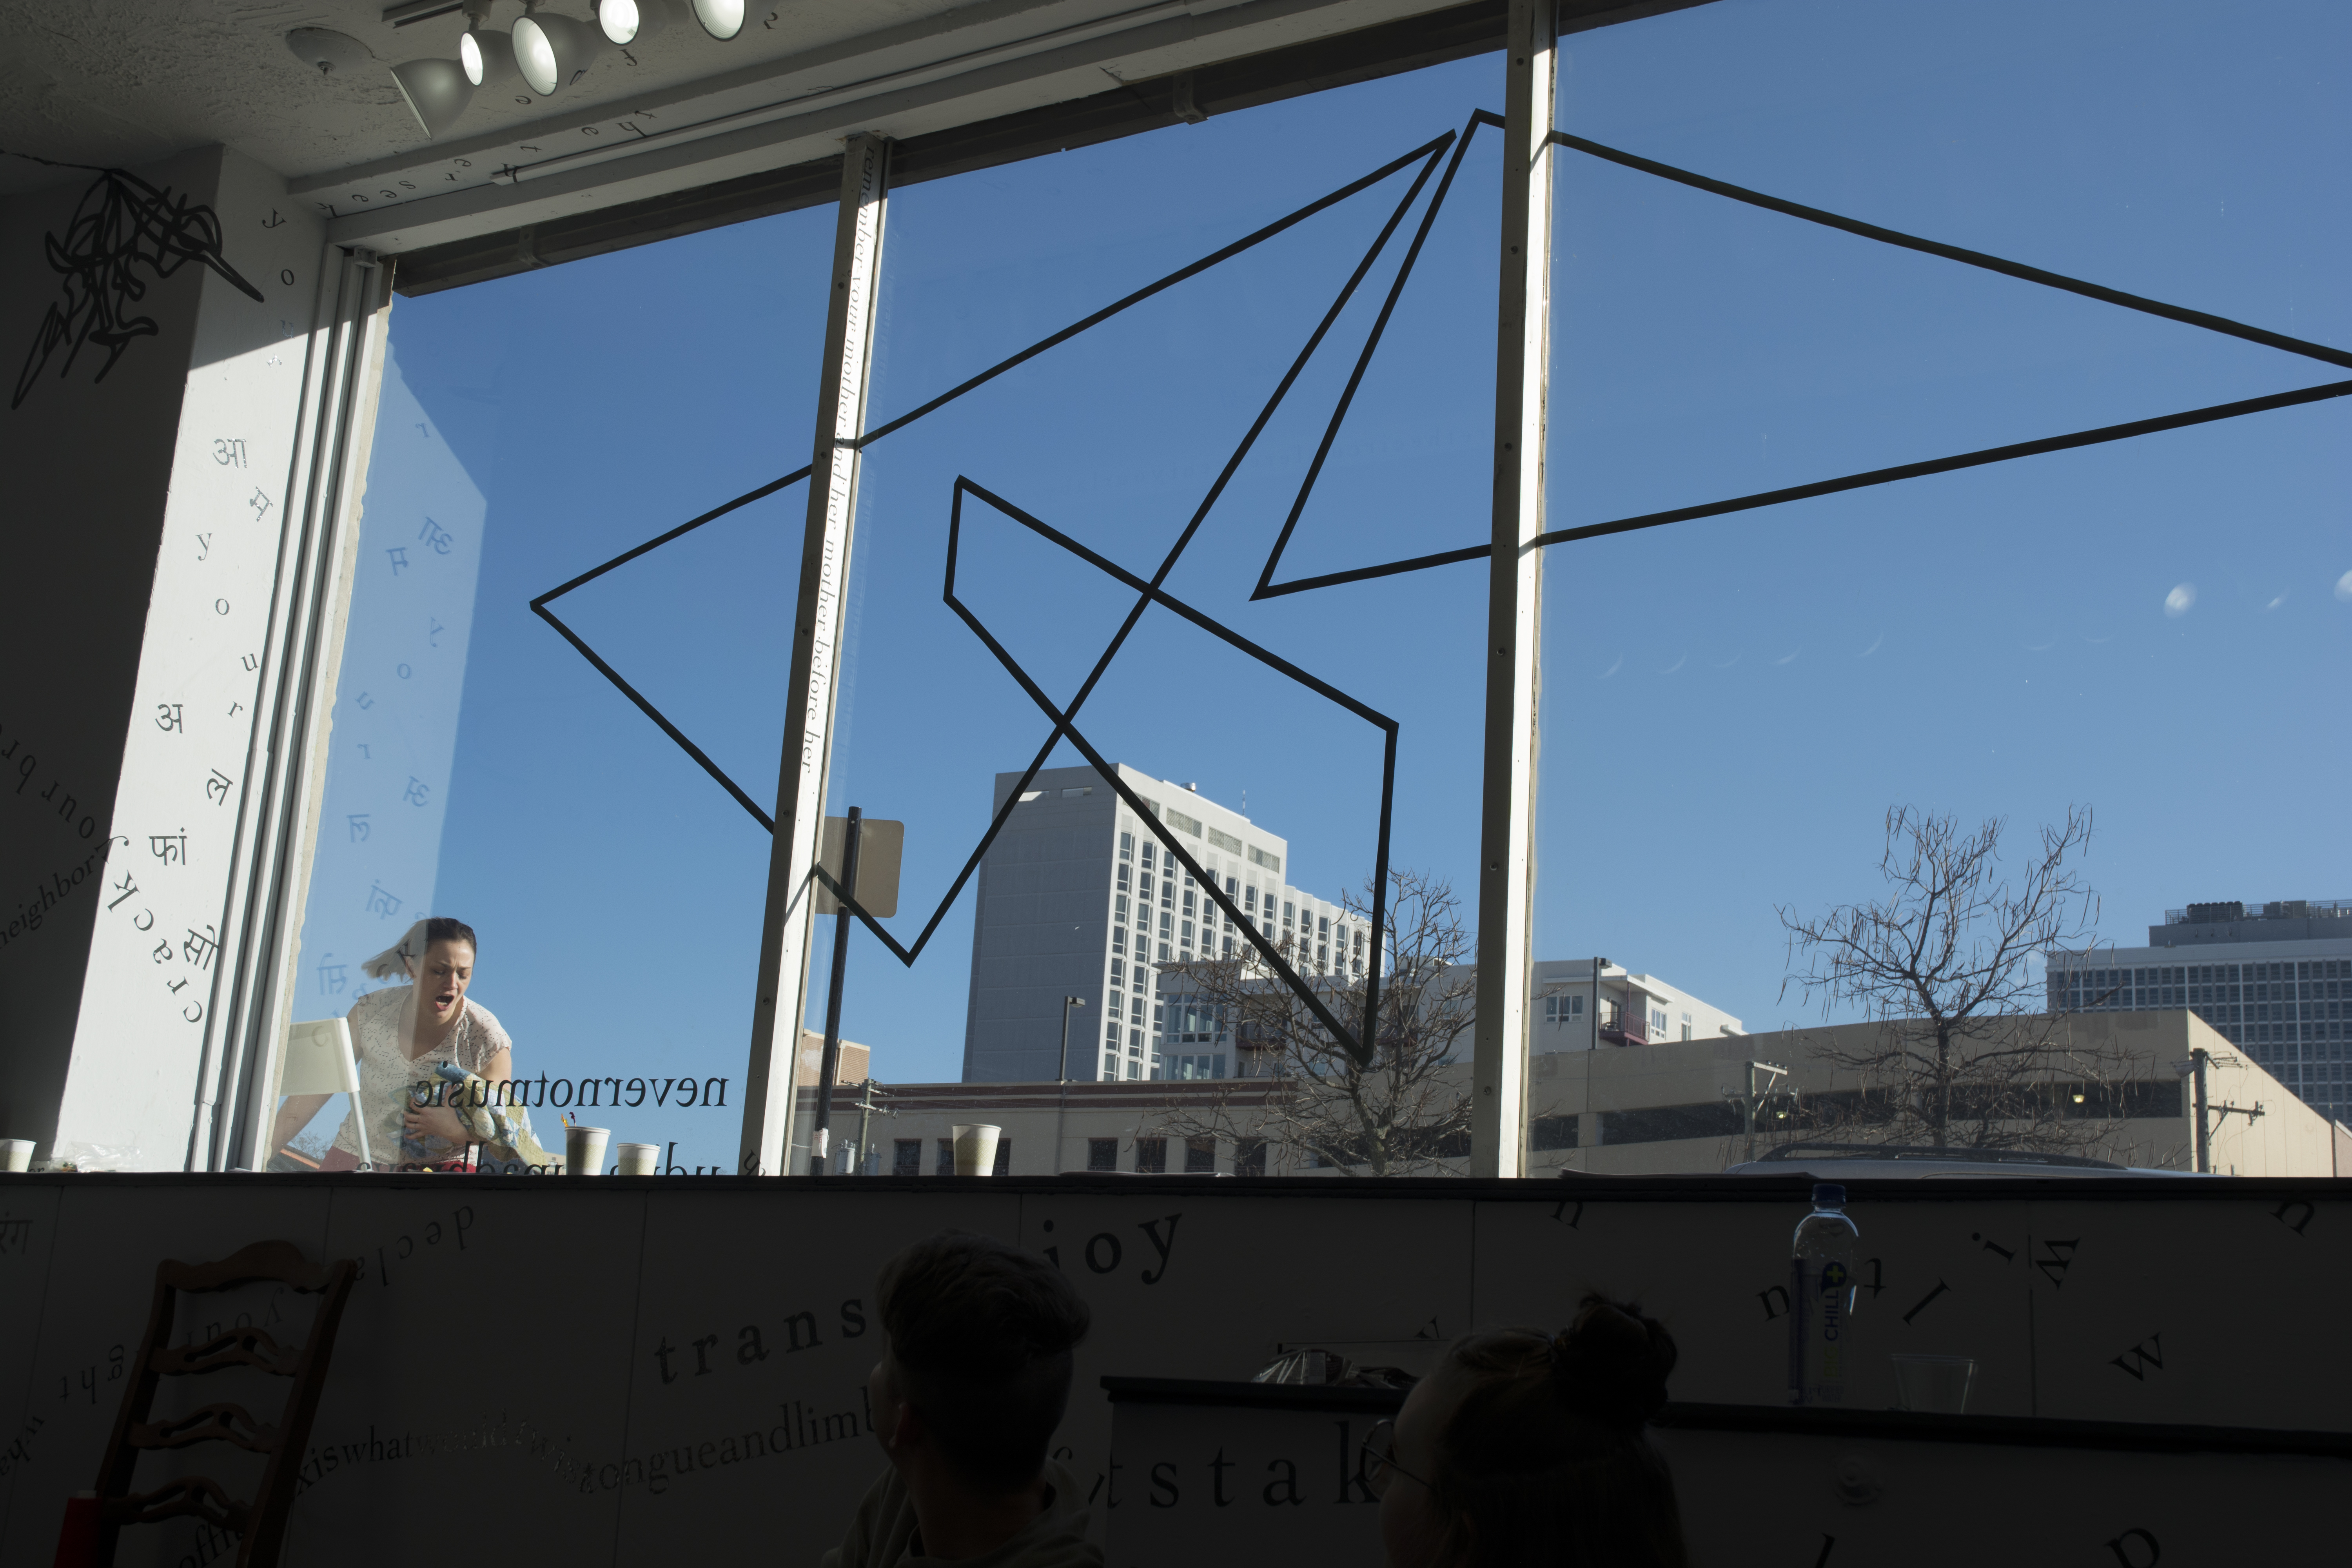 This photo shows the gallery’s large front window (with a motif of intersecting triangular shapes made of black vinyl) from the inside, and the blue sky beyond. Outside, the performer is visible through the bottom-left corner of the window. She holds something in her left arm as she moves toward the window, seemingly screaming. Inside, around the edges of the photograph, black vinyl letters are installed directly onto the white gallery walls, in the form of words and phrases in English and Hindi. Text appears in different sizes and spatial orientations (e.g., right-side up, upside-down, diagonal, vertical, and organic shapes), with some words/phrases expanded in space, condensed, or intersecting with other text. Gestural drawings—also made of black vinyl—are shown on the top left-hand side of the image. Low and very shadowy in the foreground are two audience members, sitting on the gallery floor with heads twisted toward the performer outside.